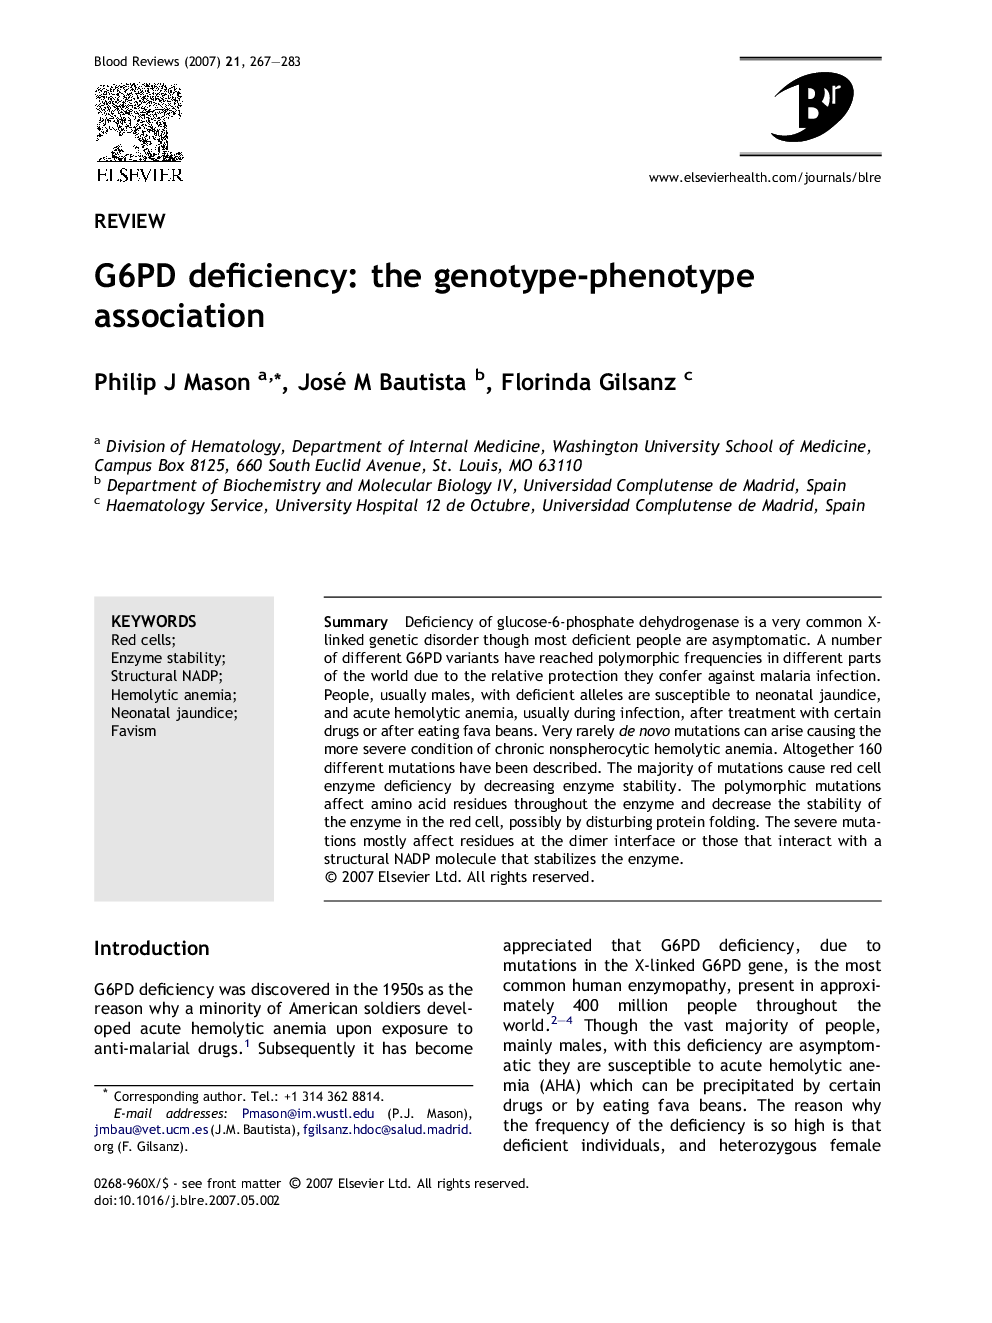 G6PD deficiency: the genotype-phenotype association